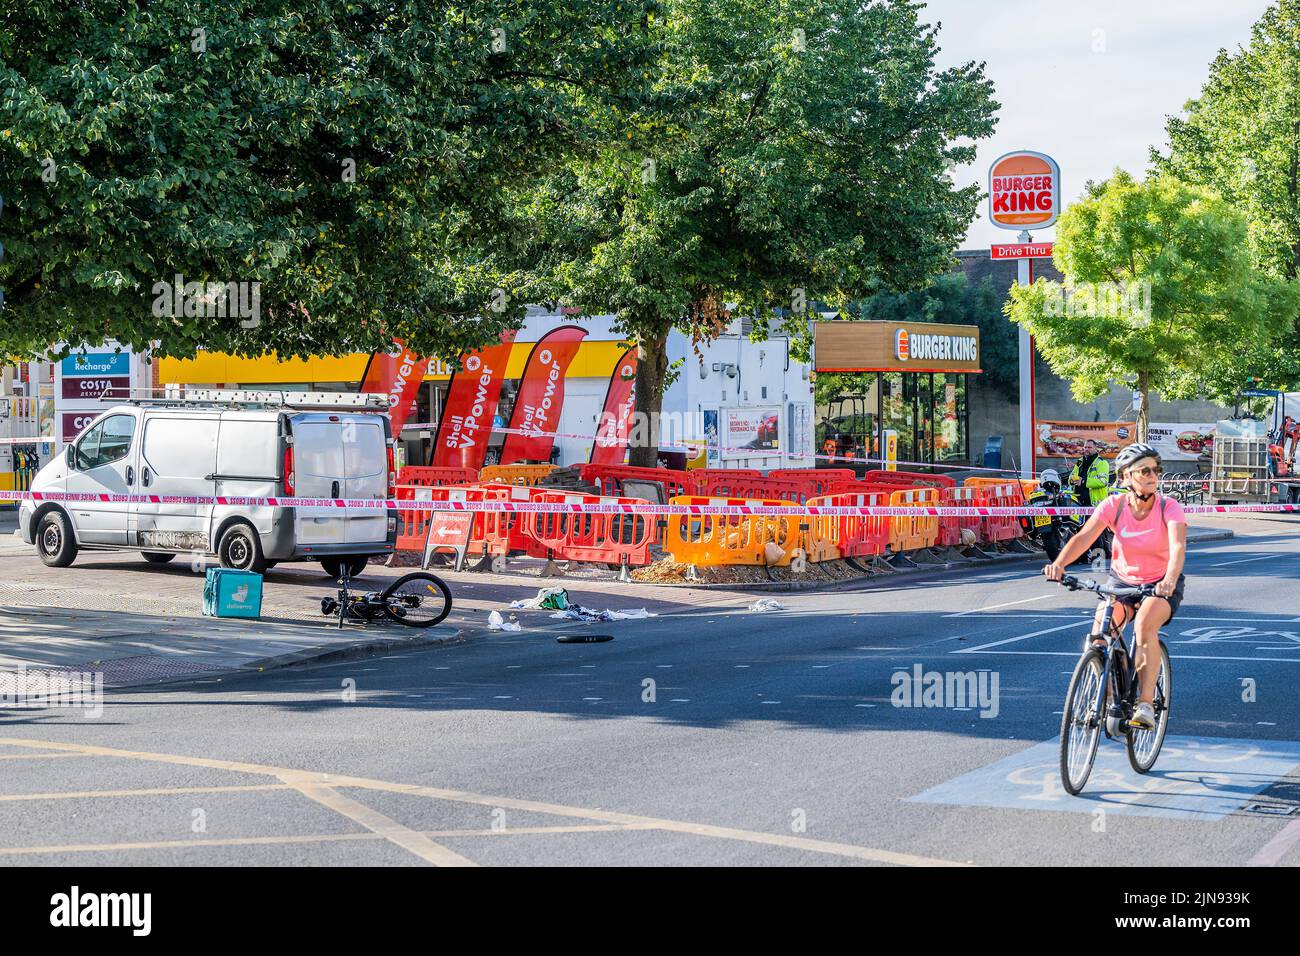 London, UK. 10th Aug, 2022. Police block Balham Hill after a deliveroo rider hits a van outside the Shell petrol station. According to a witness the rider was not wearing a helmet and suffered a head injury. Credit: Guy Bell/Alamy Live News Stock Photo